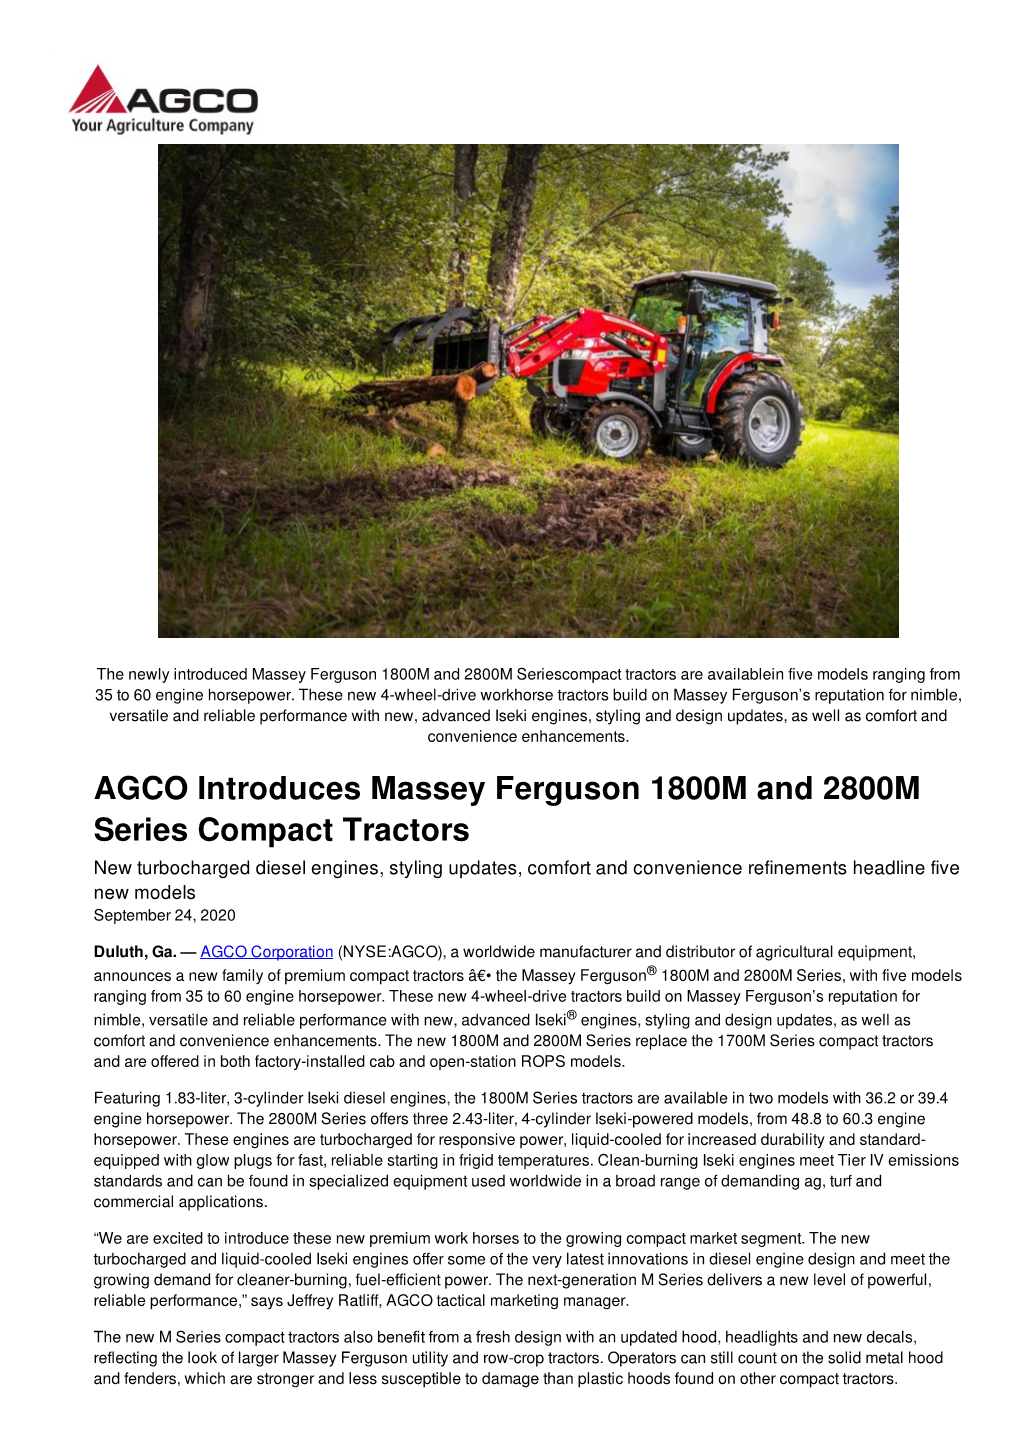 AGCO Introduces Massey Ferguson 1800M and 2800M Series Compact